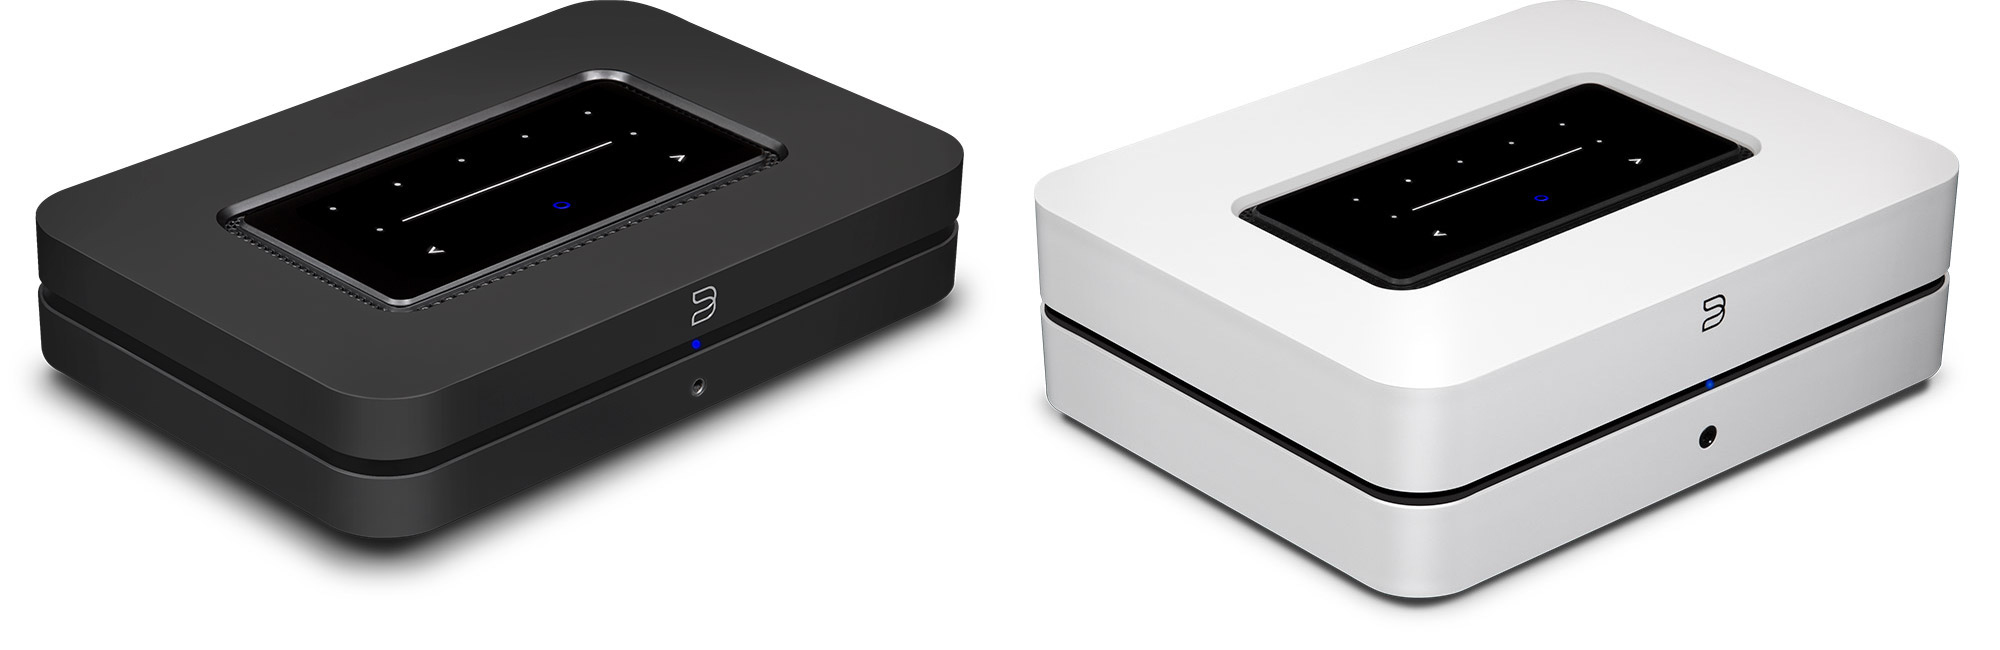 Bluesound update their NODE and POWERNODE wireless, multi-room, hi-res music streamers